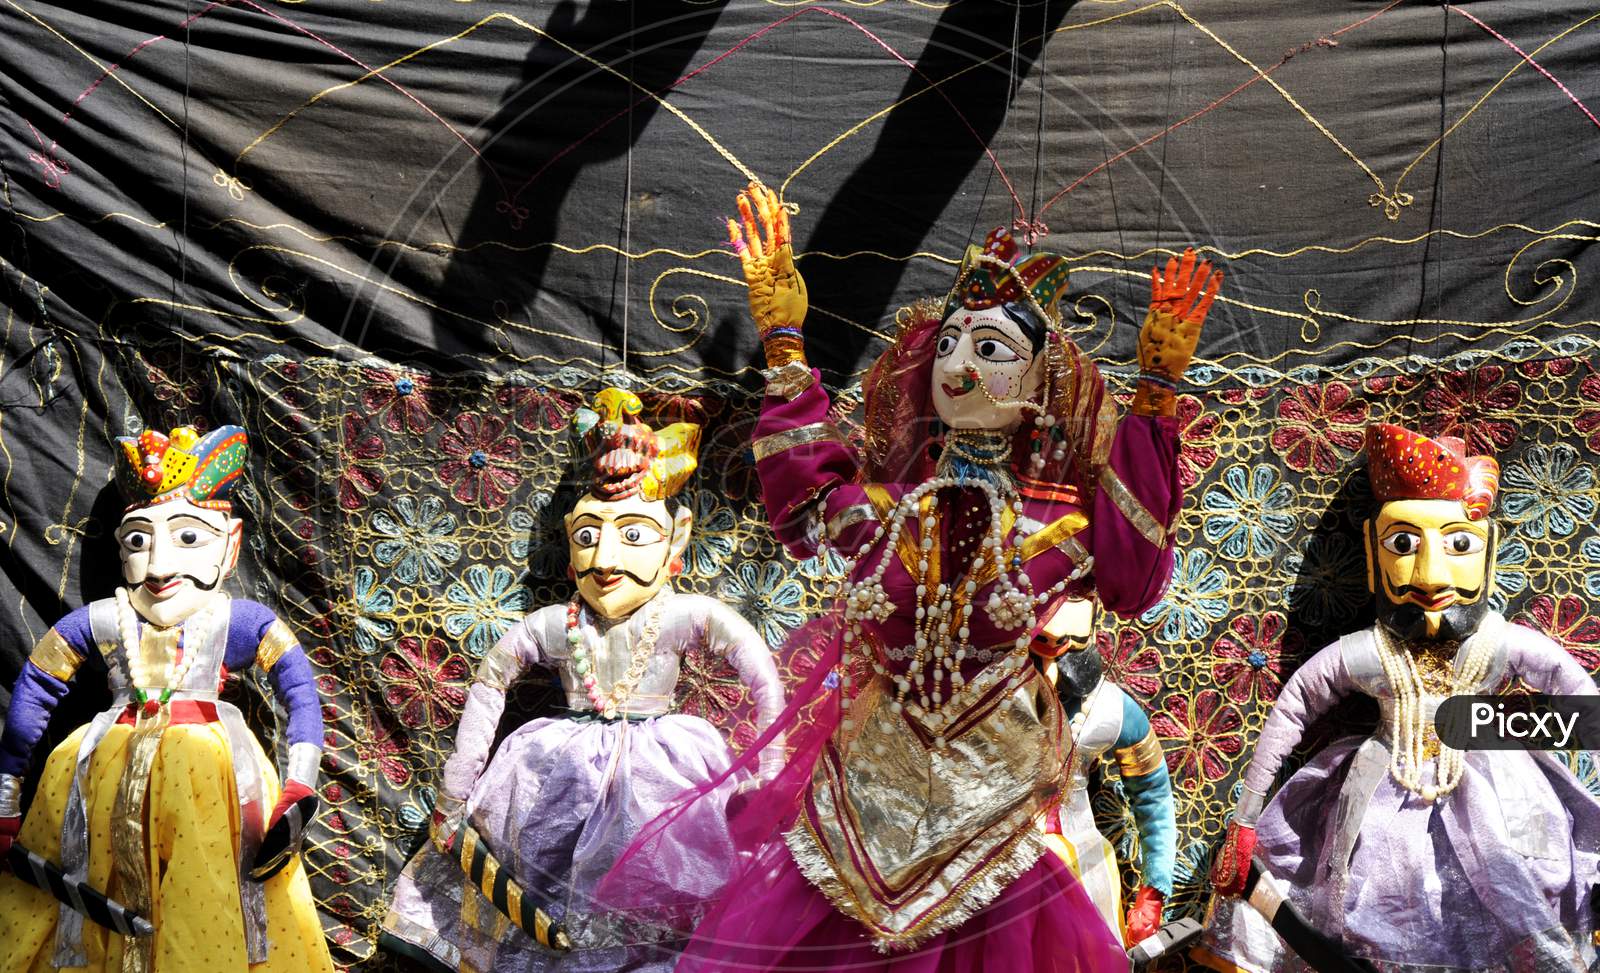 Colorful Rajasthani Puppet Dolls Of Jaisalmer. Traditional Puppet Shows In Rajasthan Is A Popular Tourist Attraction.